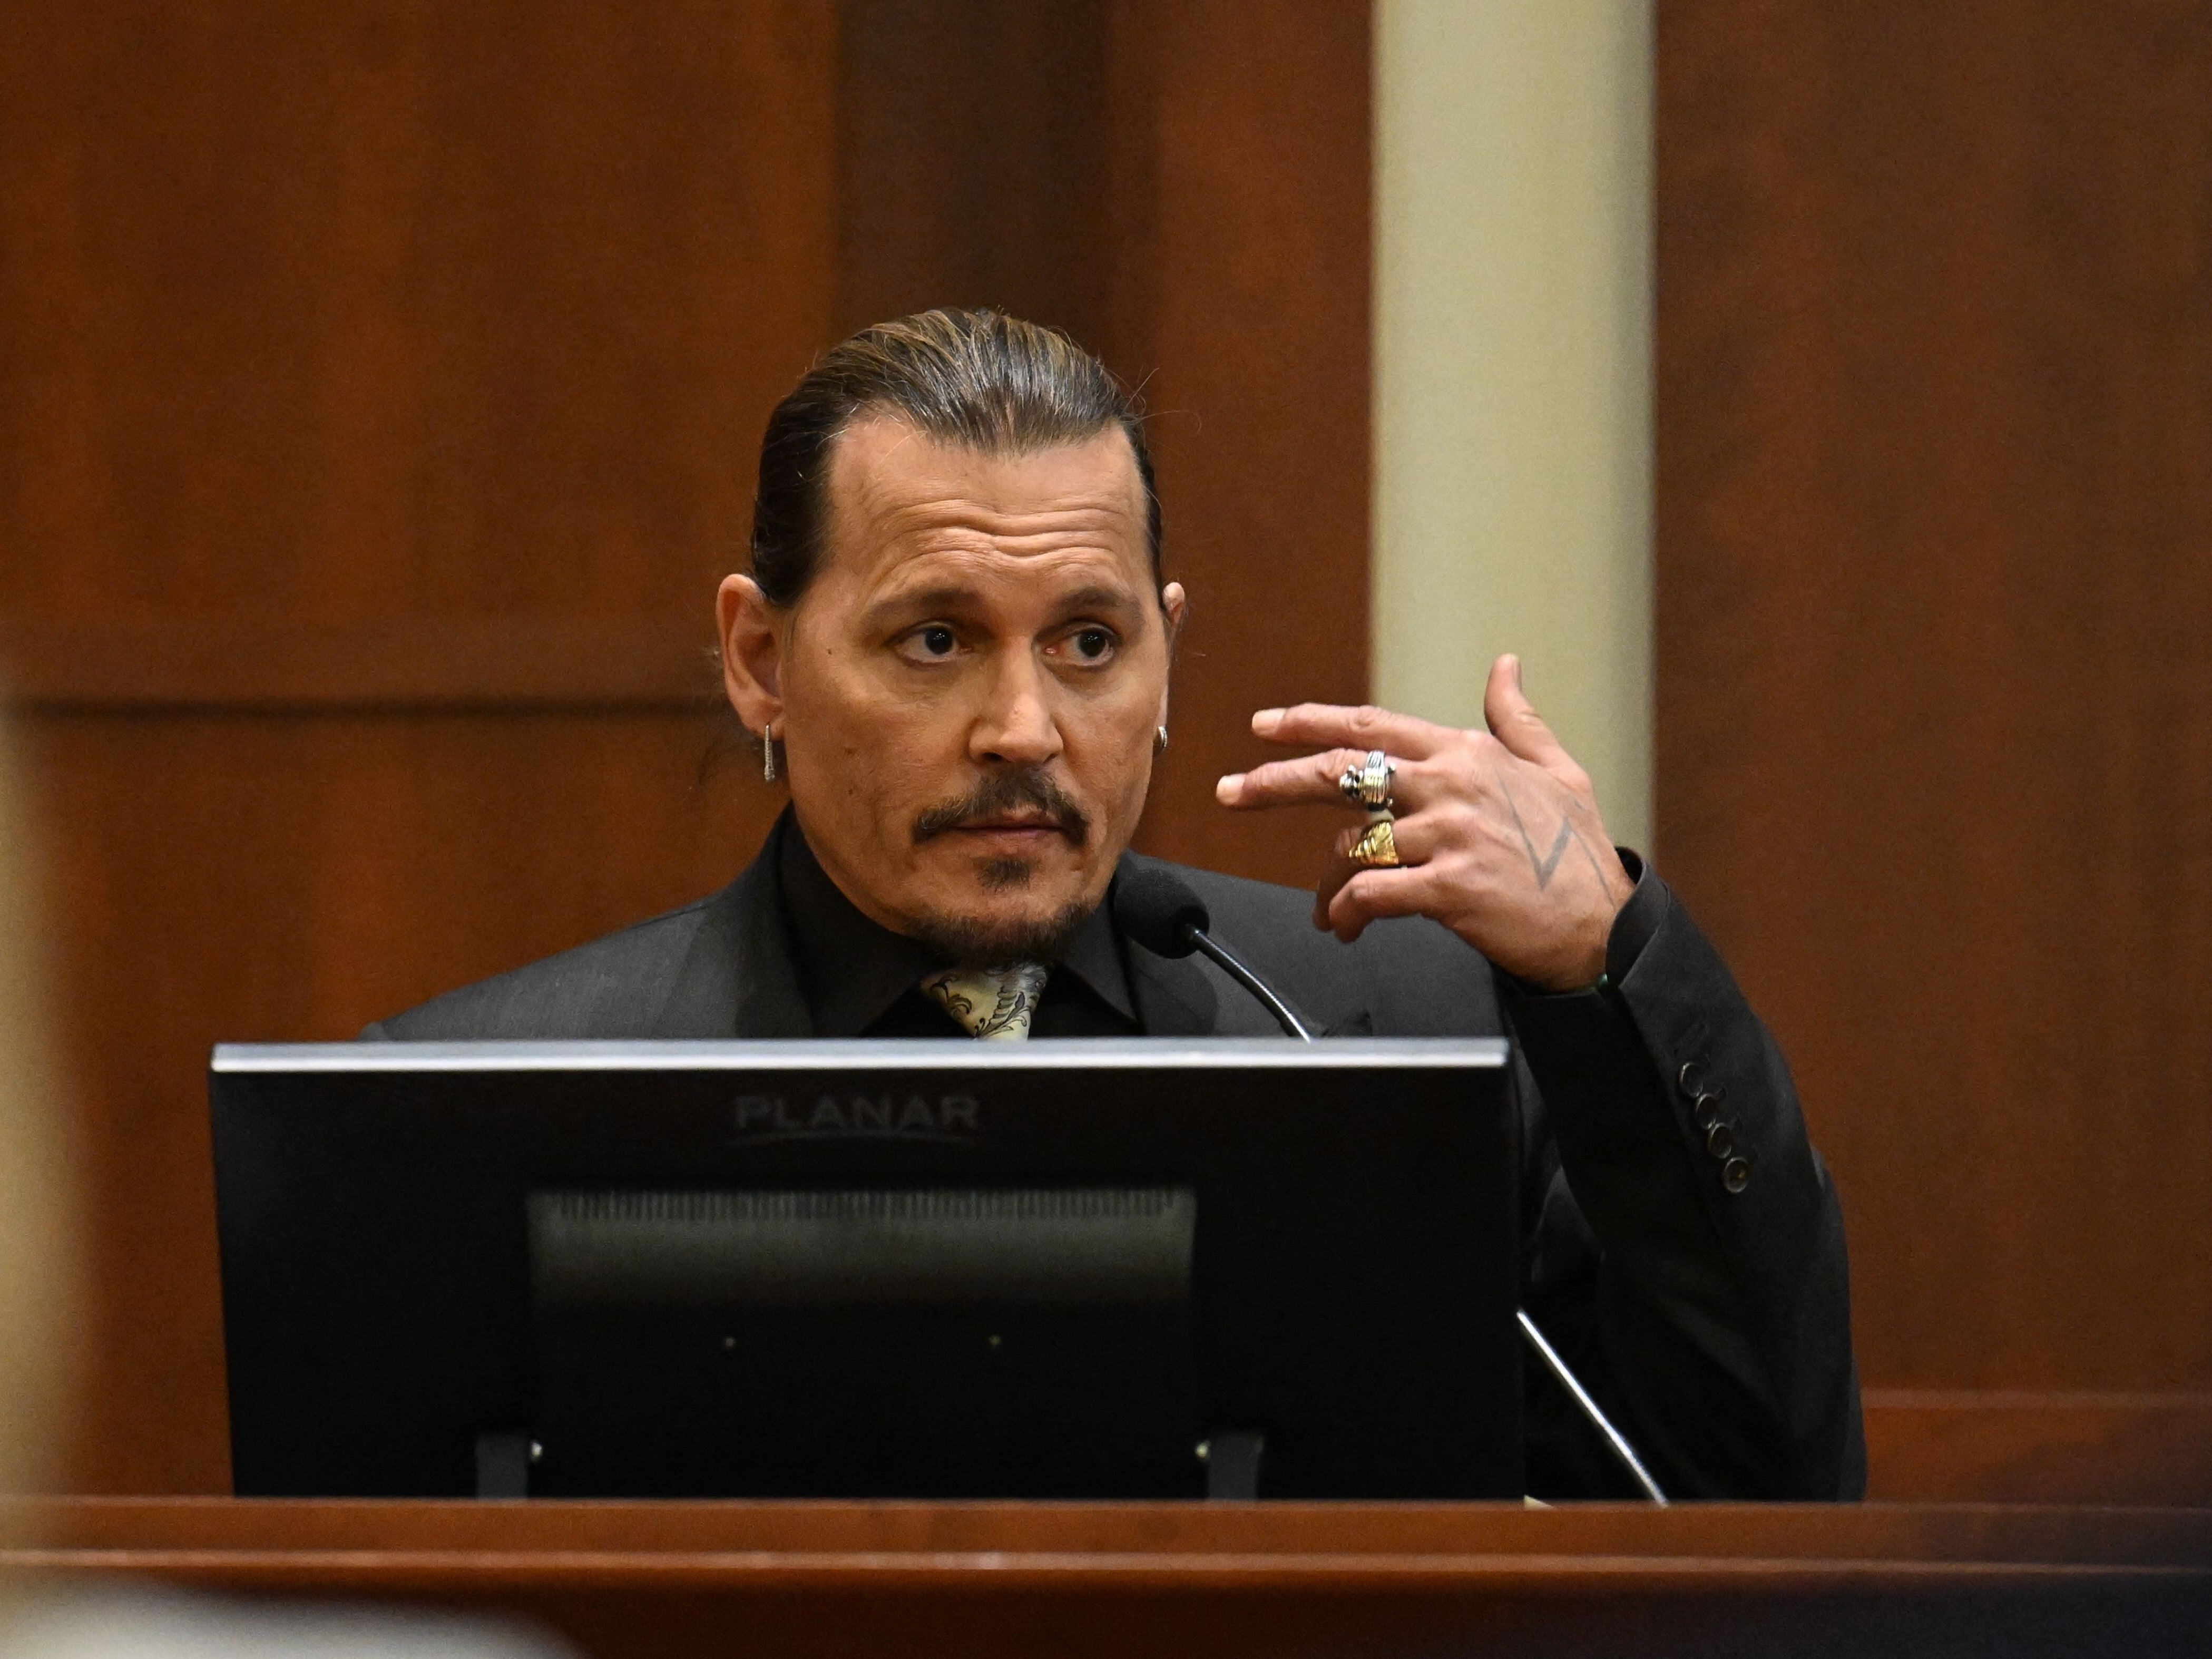 Depp testifying during his defamation trial on 19 April 2022